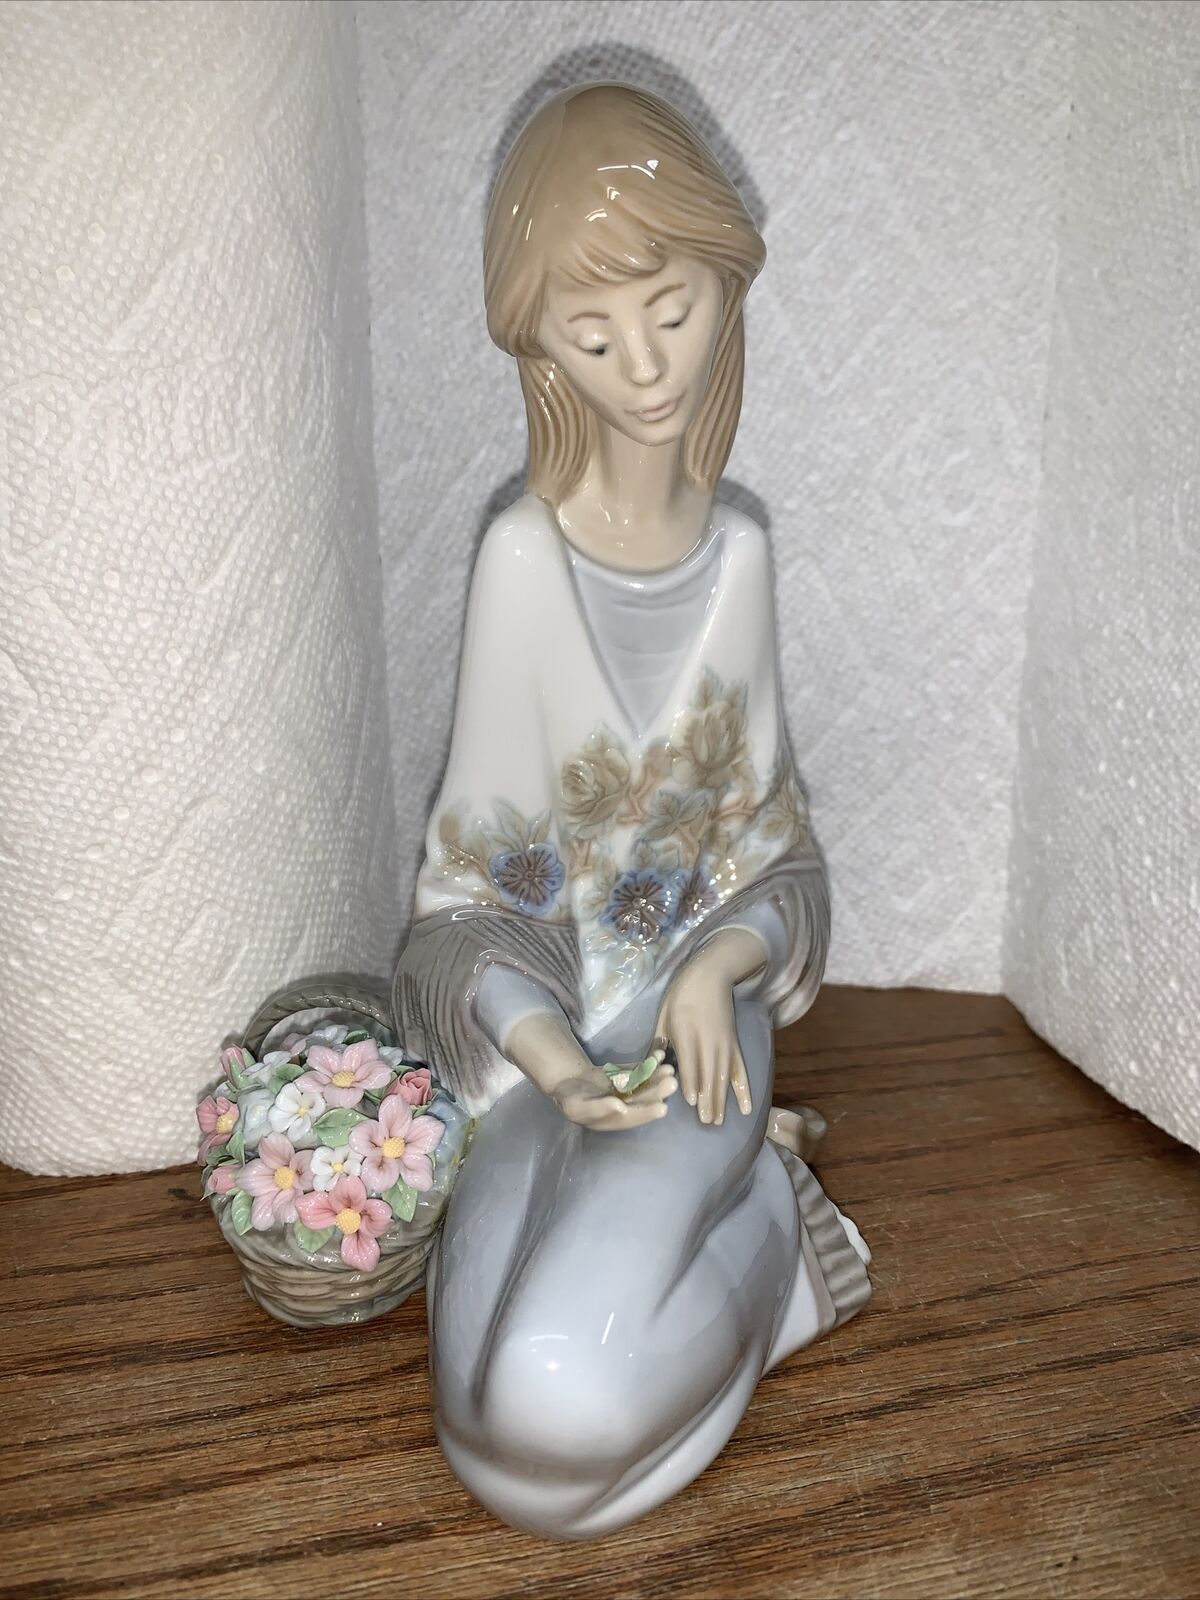 1988 Lladro 7607 Flowers Song Porcelain Figurine Girl with Basket Sitting